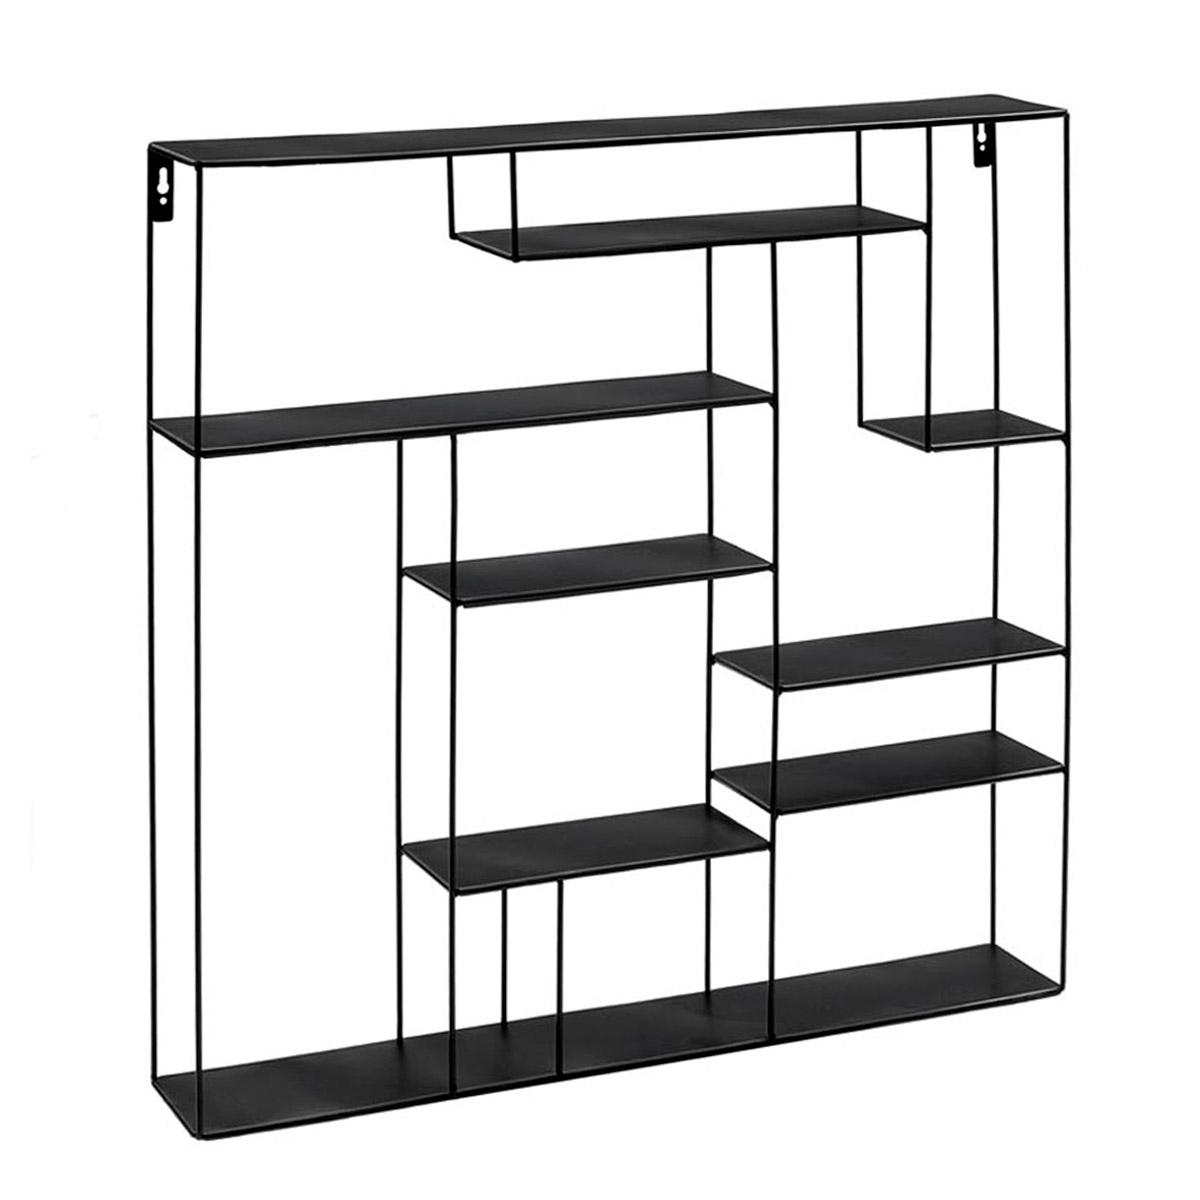 Lily metal stand